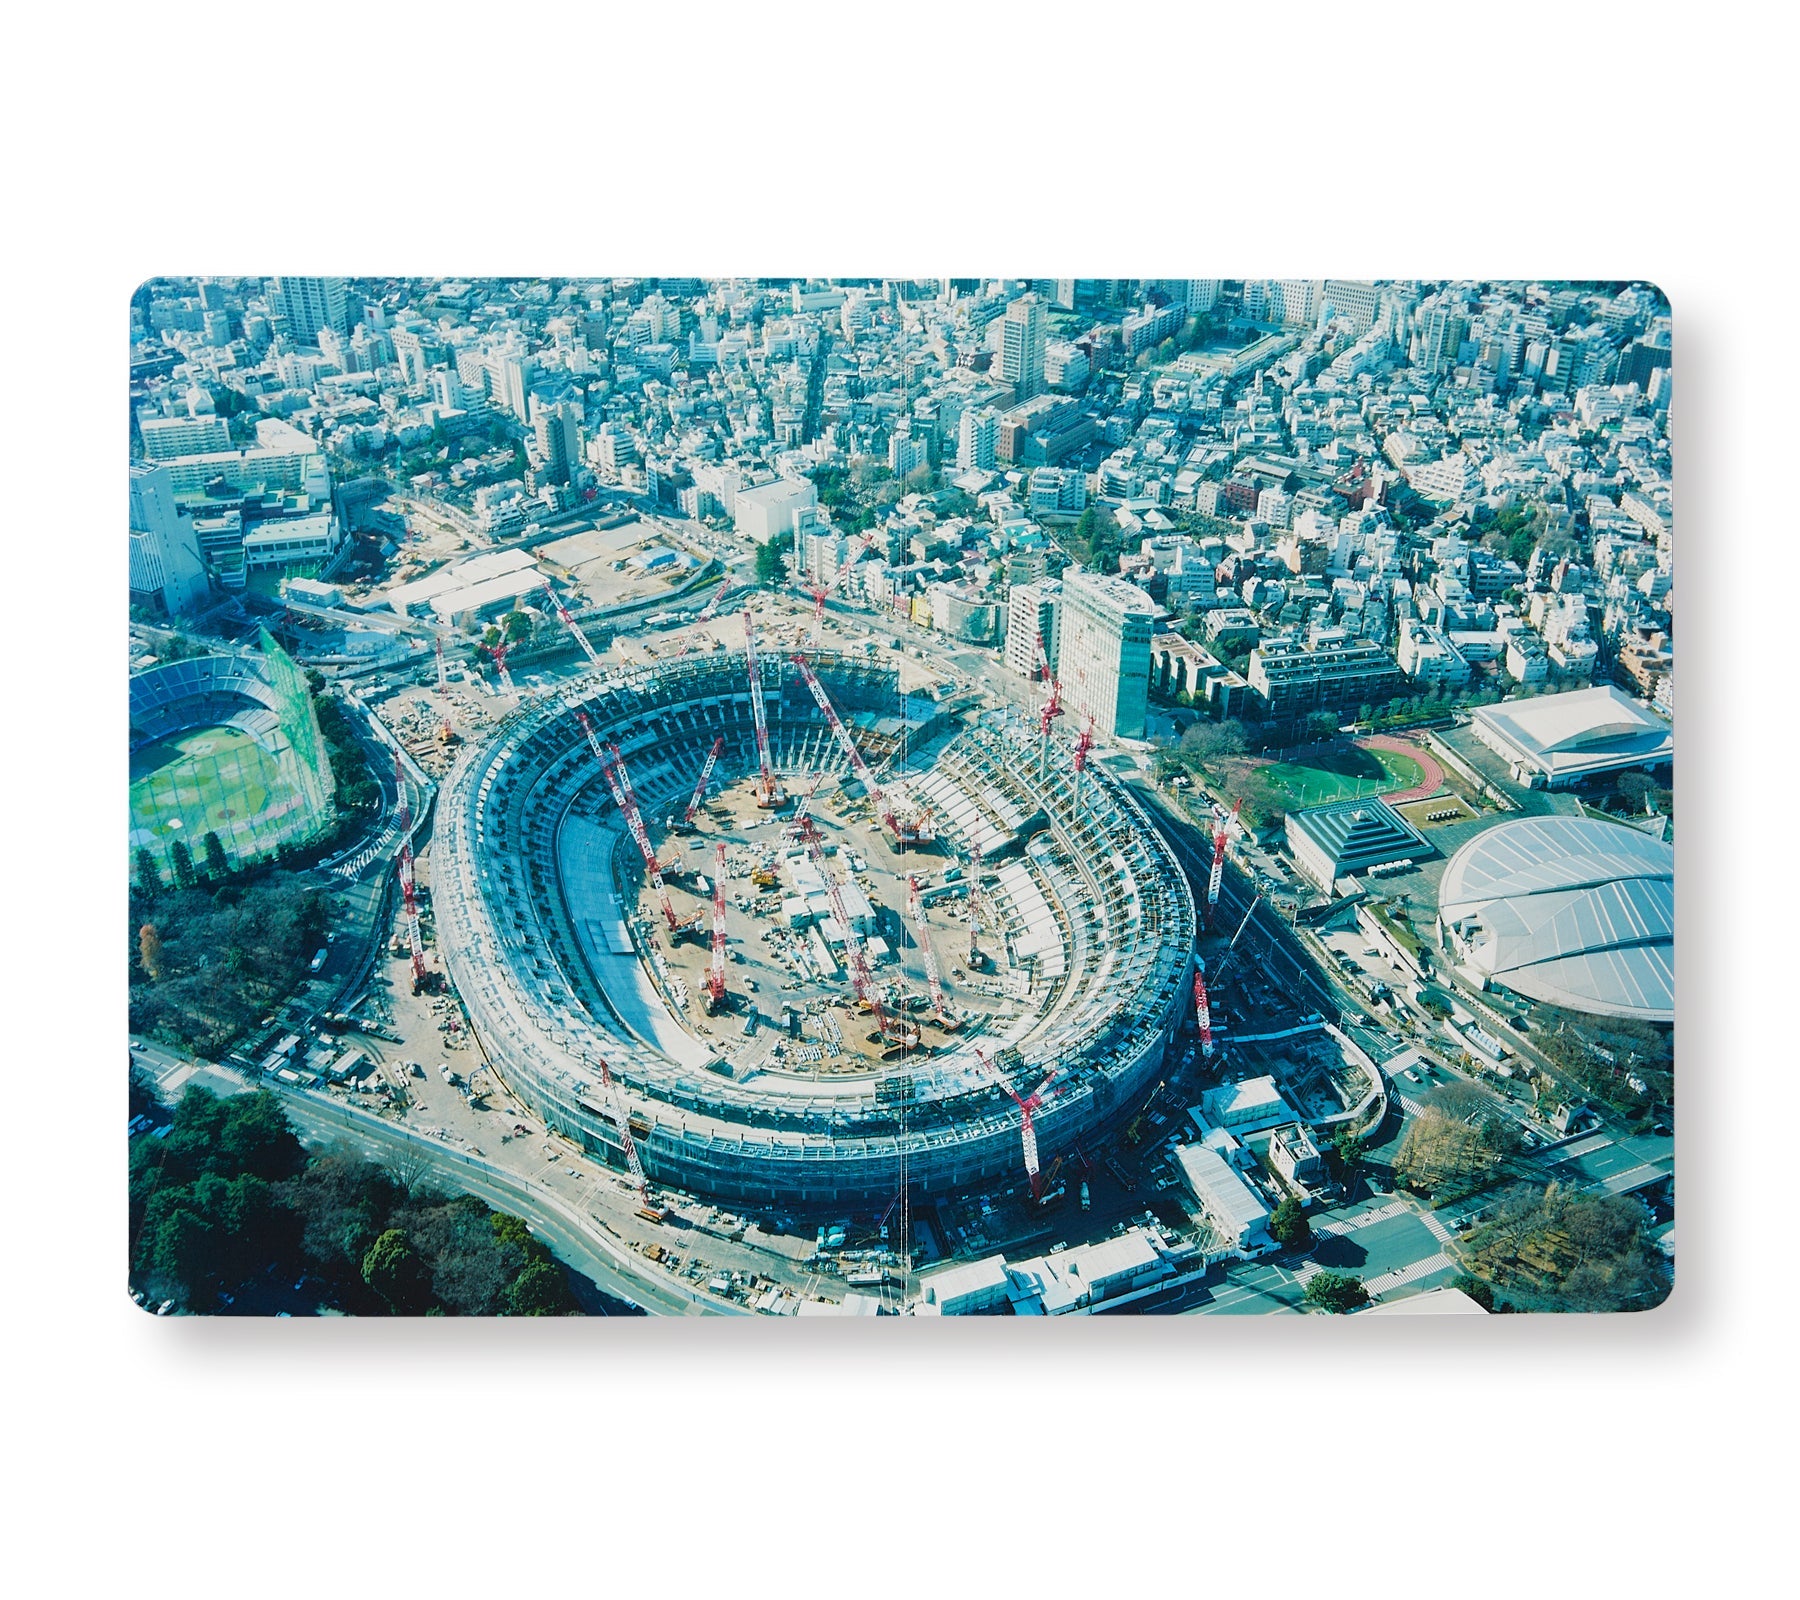 TOKYO OLYMPIA by Takashi Homma [SPECIAL PRINT EDITION]